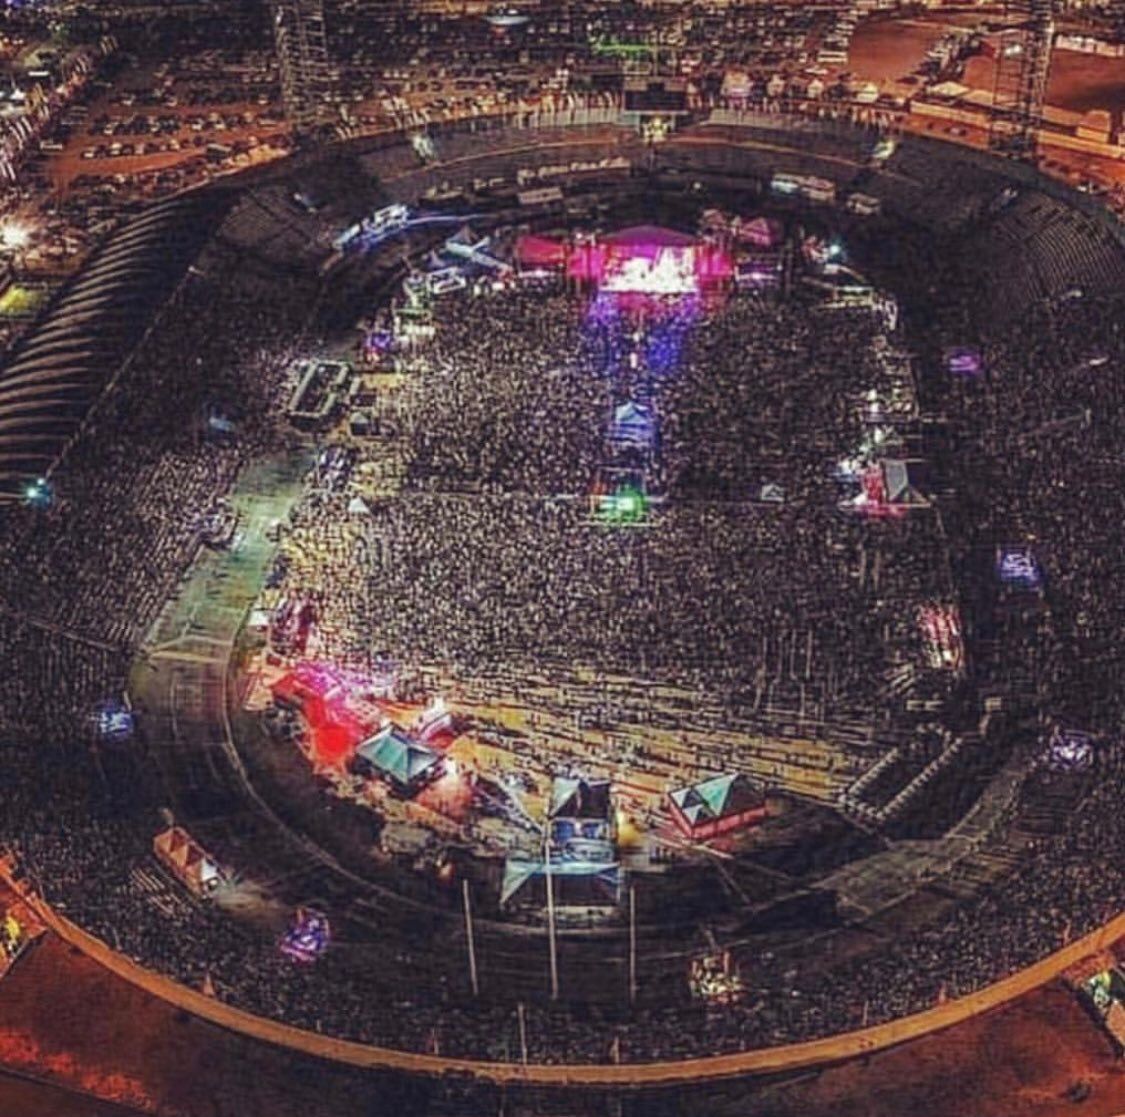 The packed National Stadium on the night of Banton's return to the stage.